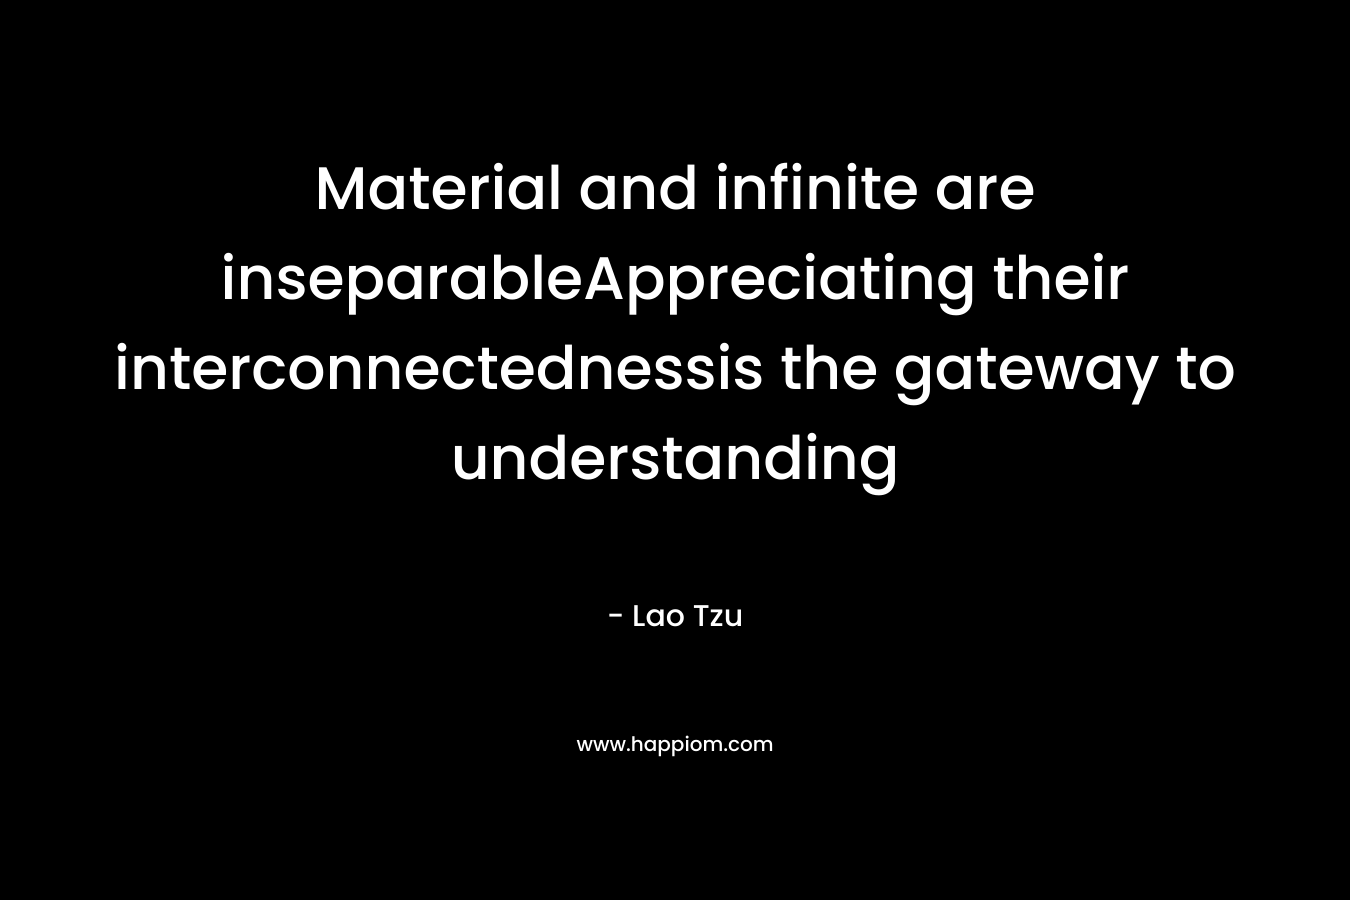 Material and infinite are inseparableAppreciating their interconnectednessis the gateway to understanding – Lao Tzu